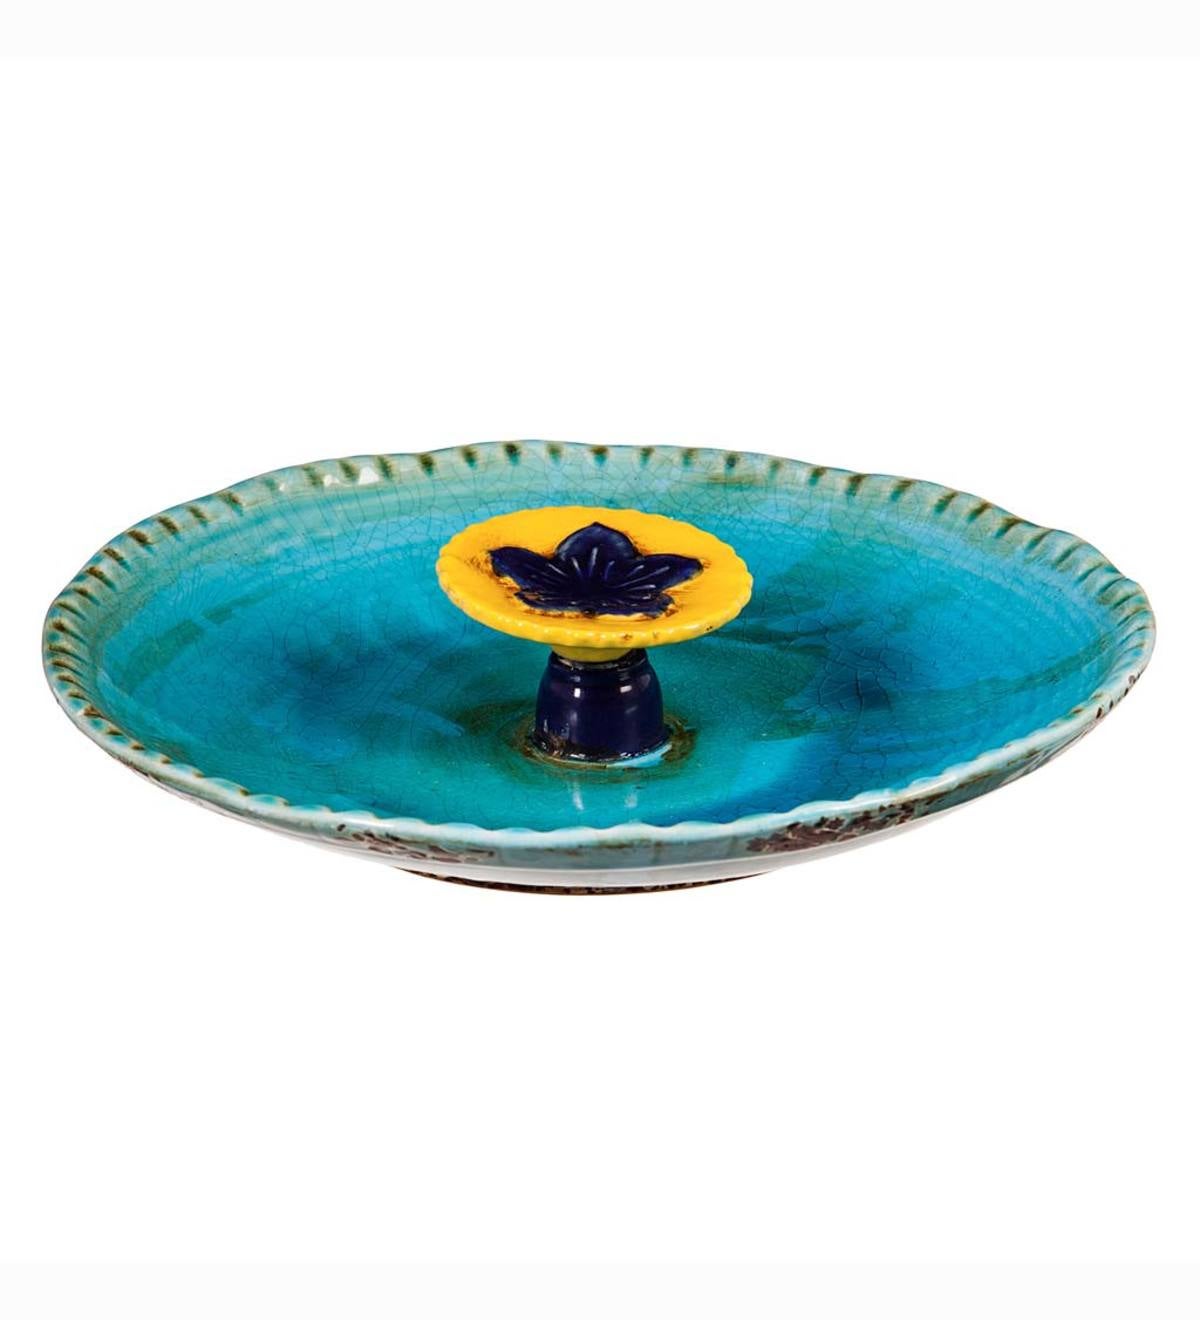 Colored Flower Ceramic Bee Bath - Turquoise